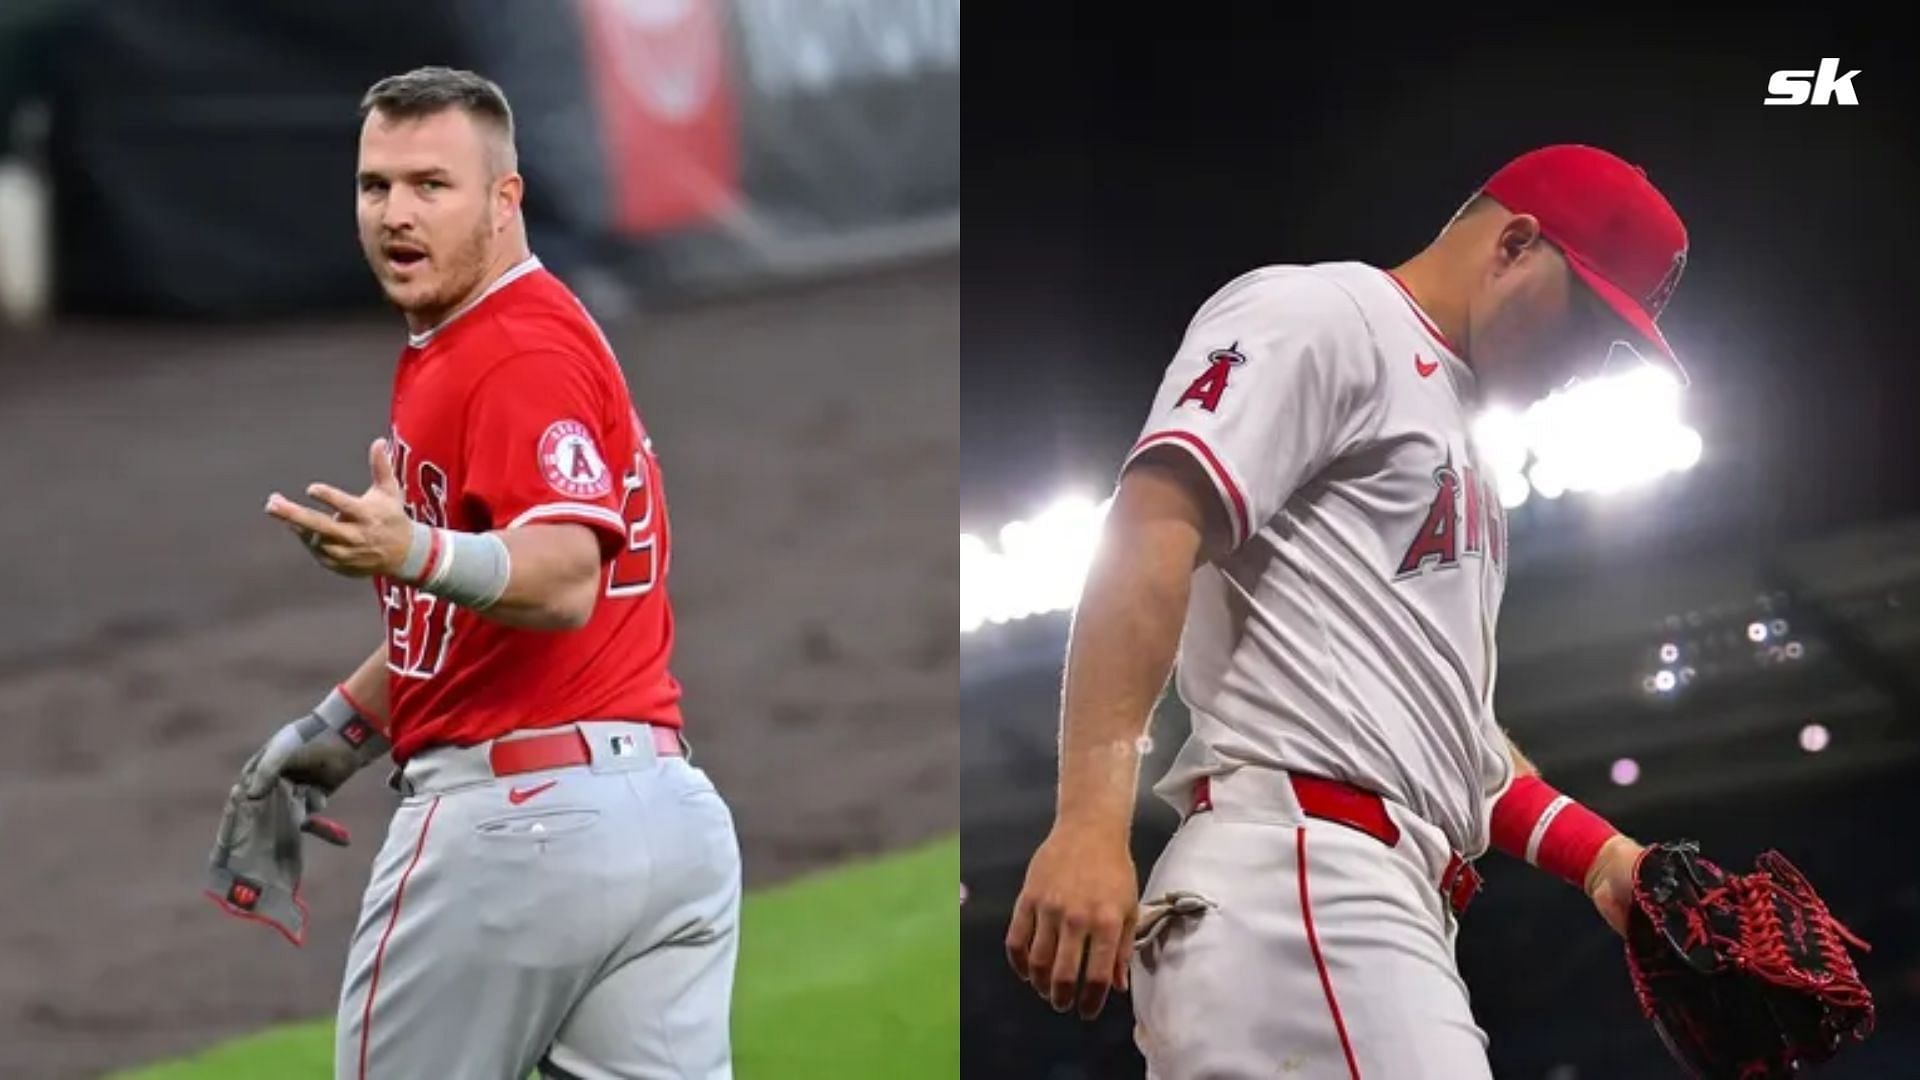 Los Angeles Angels Superstar Mike Trout